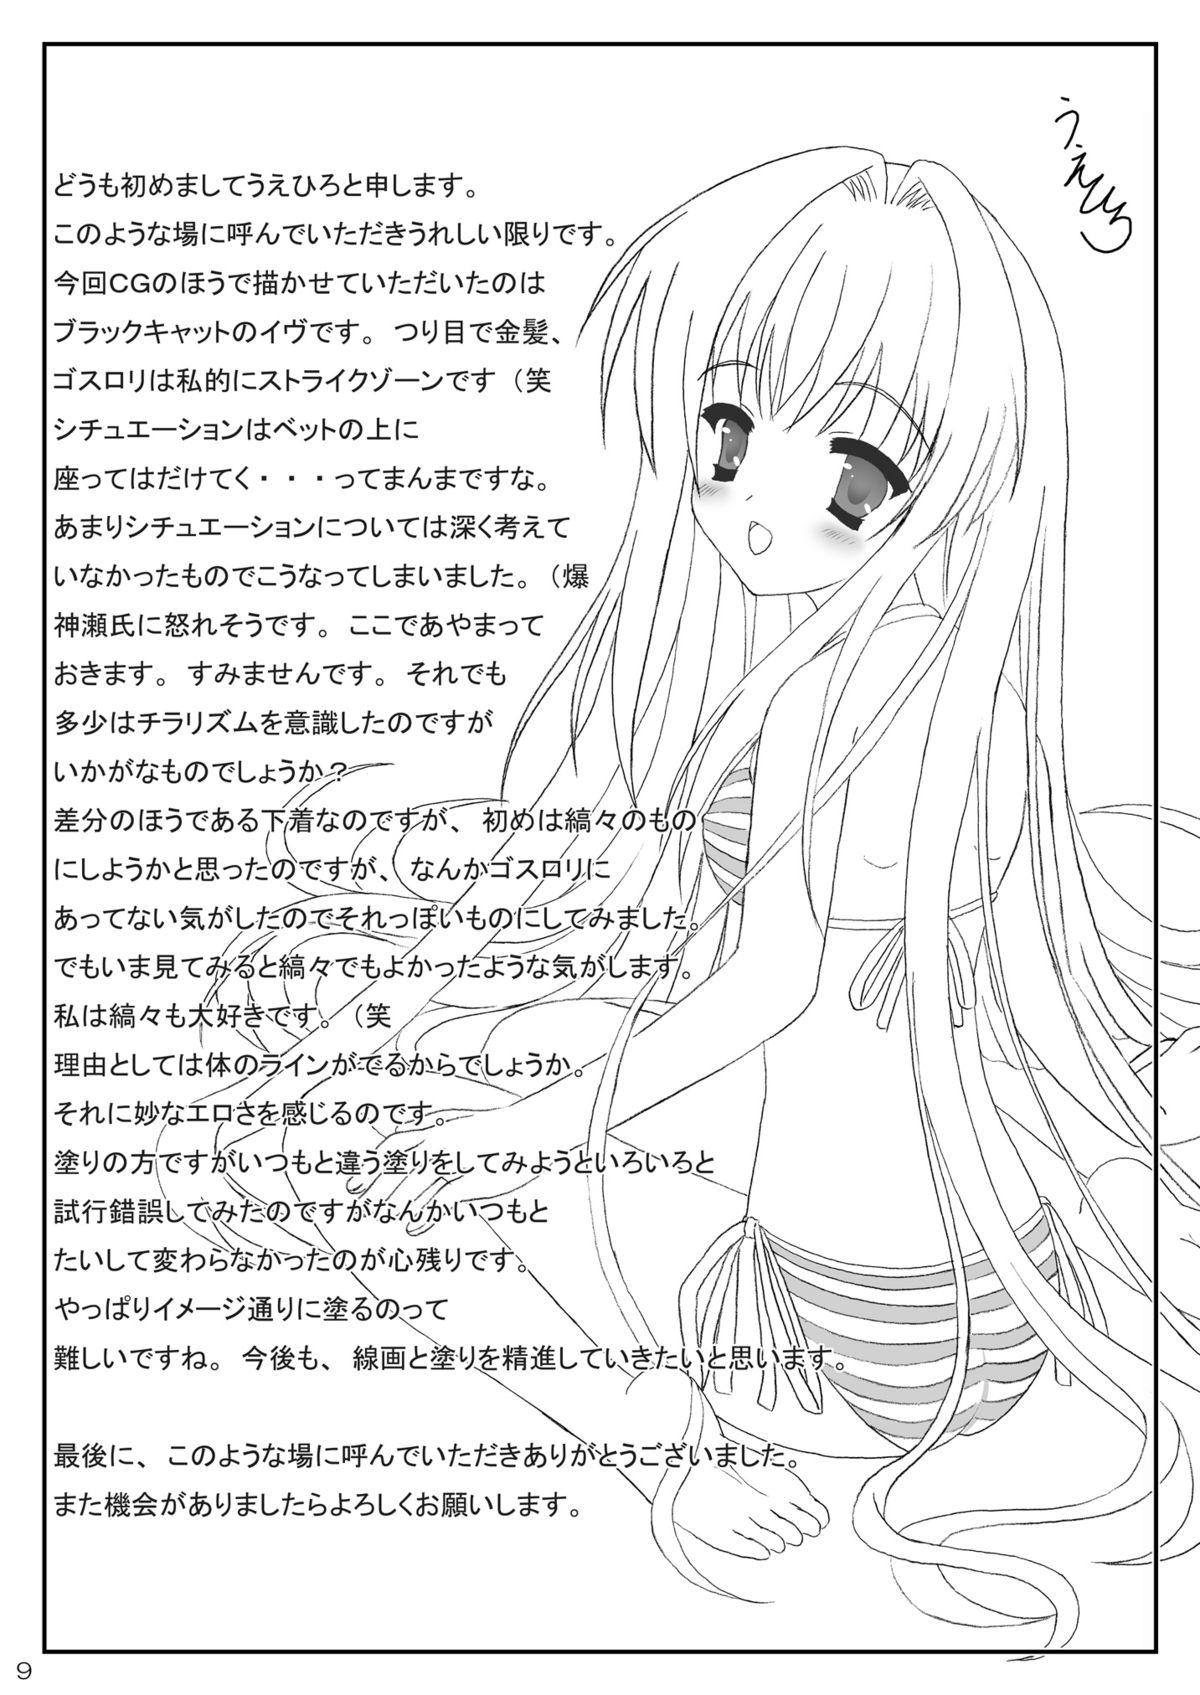 Titjob Situation Maniacs vol.0.5 Omake Hon - Fate stay night Gayemo - Page 14